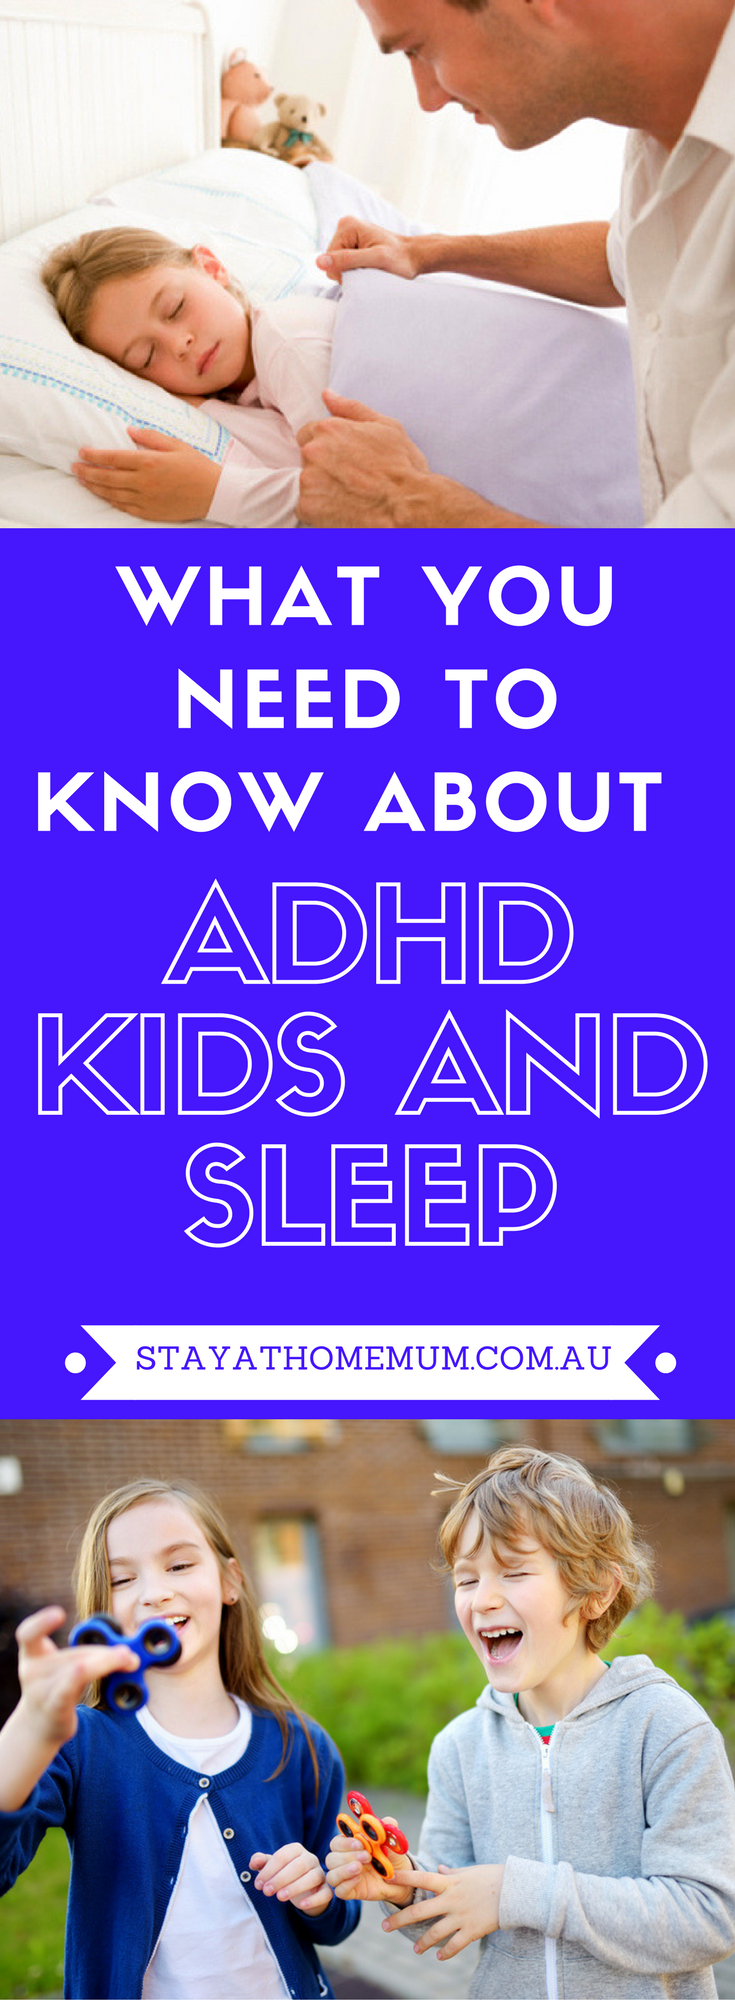 What You Need To Know About ADHD Kids And Sleep